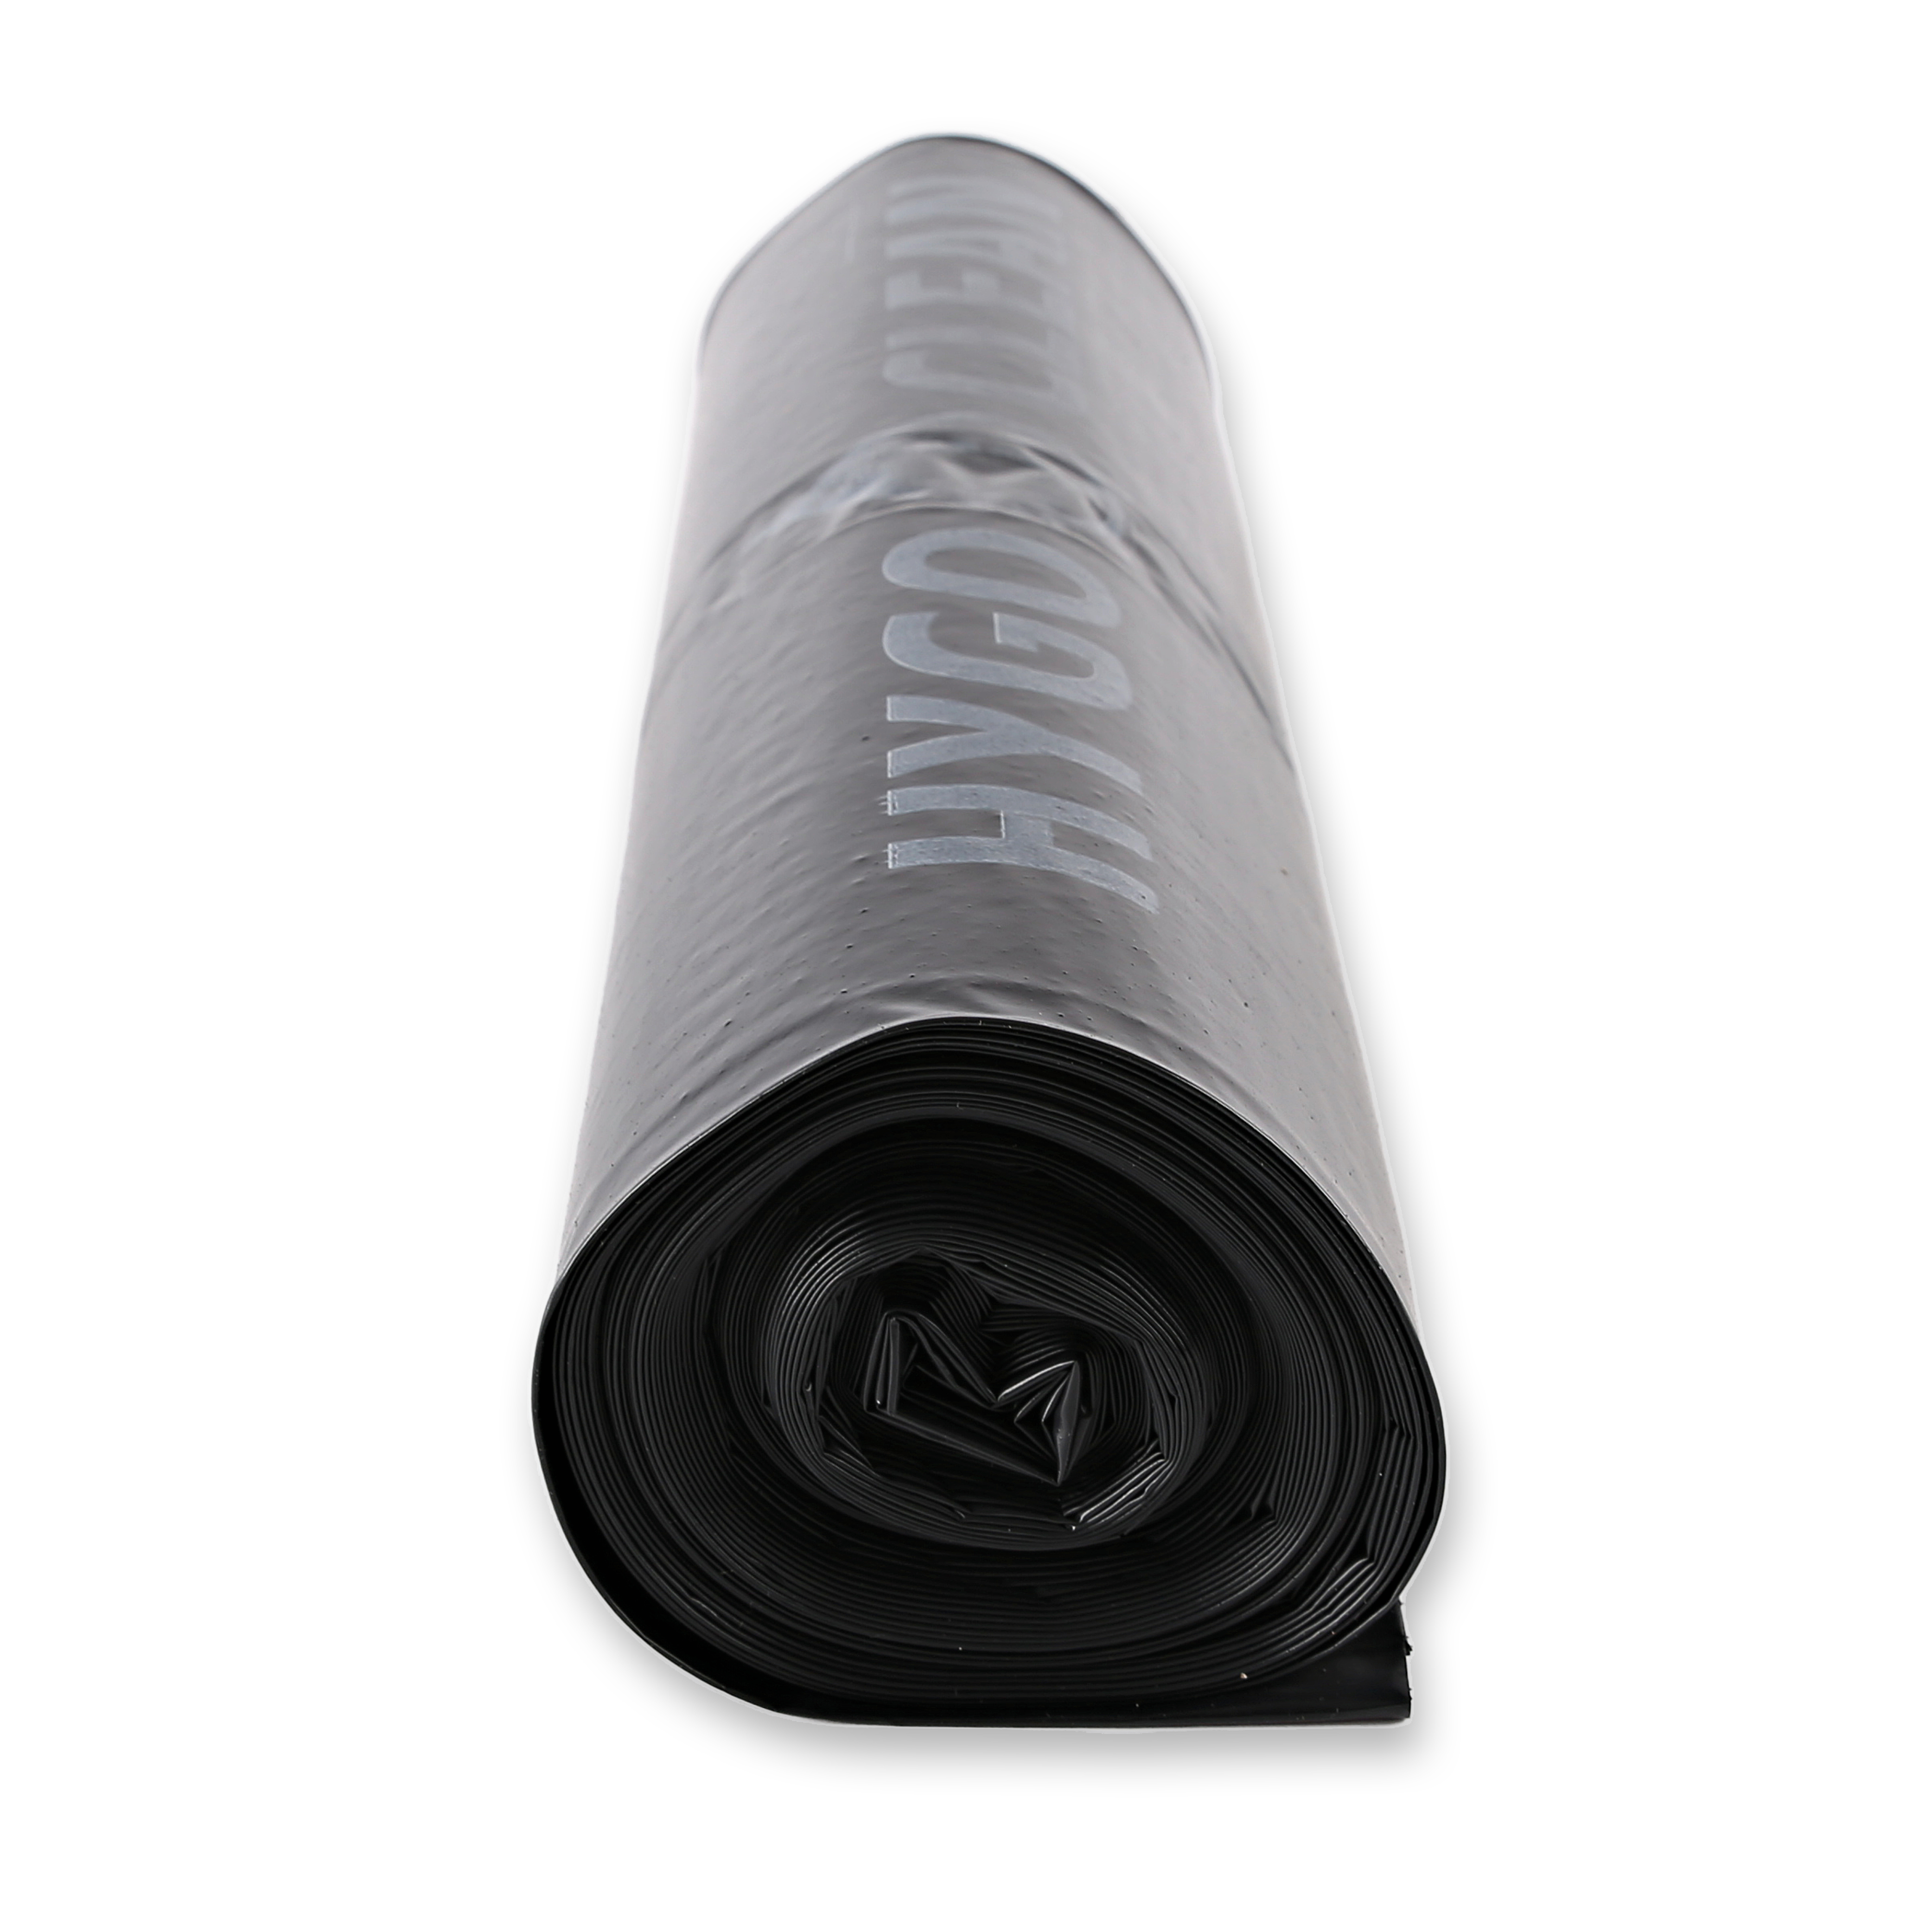 Waste bags Premium, 240 l made of LDPE, on roll, side view